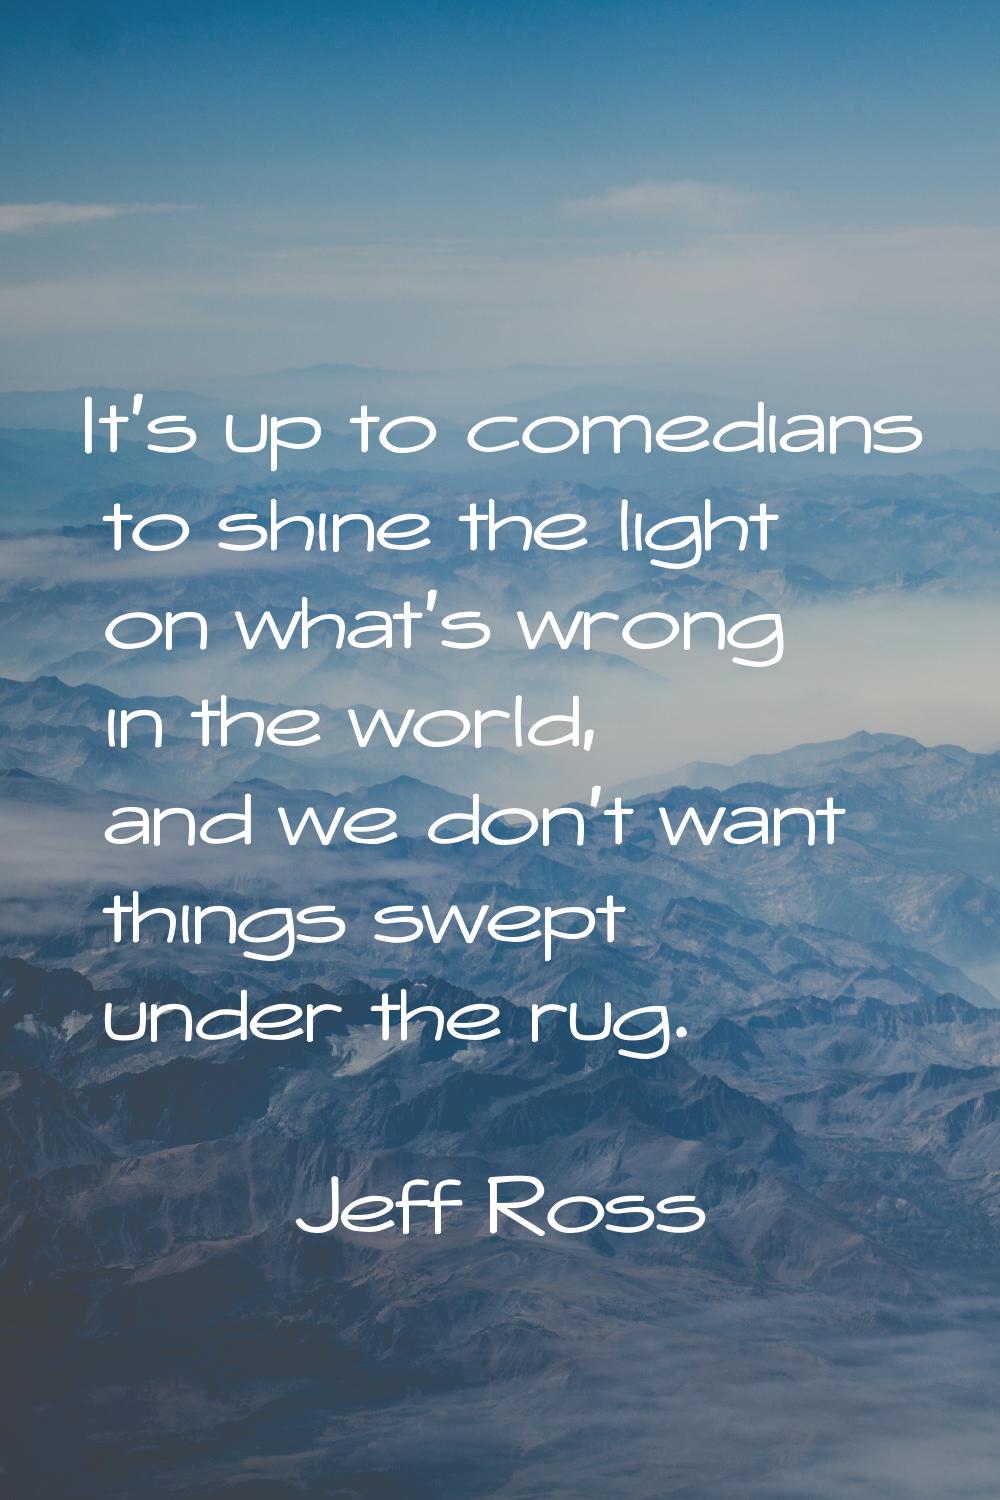 It's up to comedians to shine the light on what's wrong in the world, and we don't want things swep